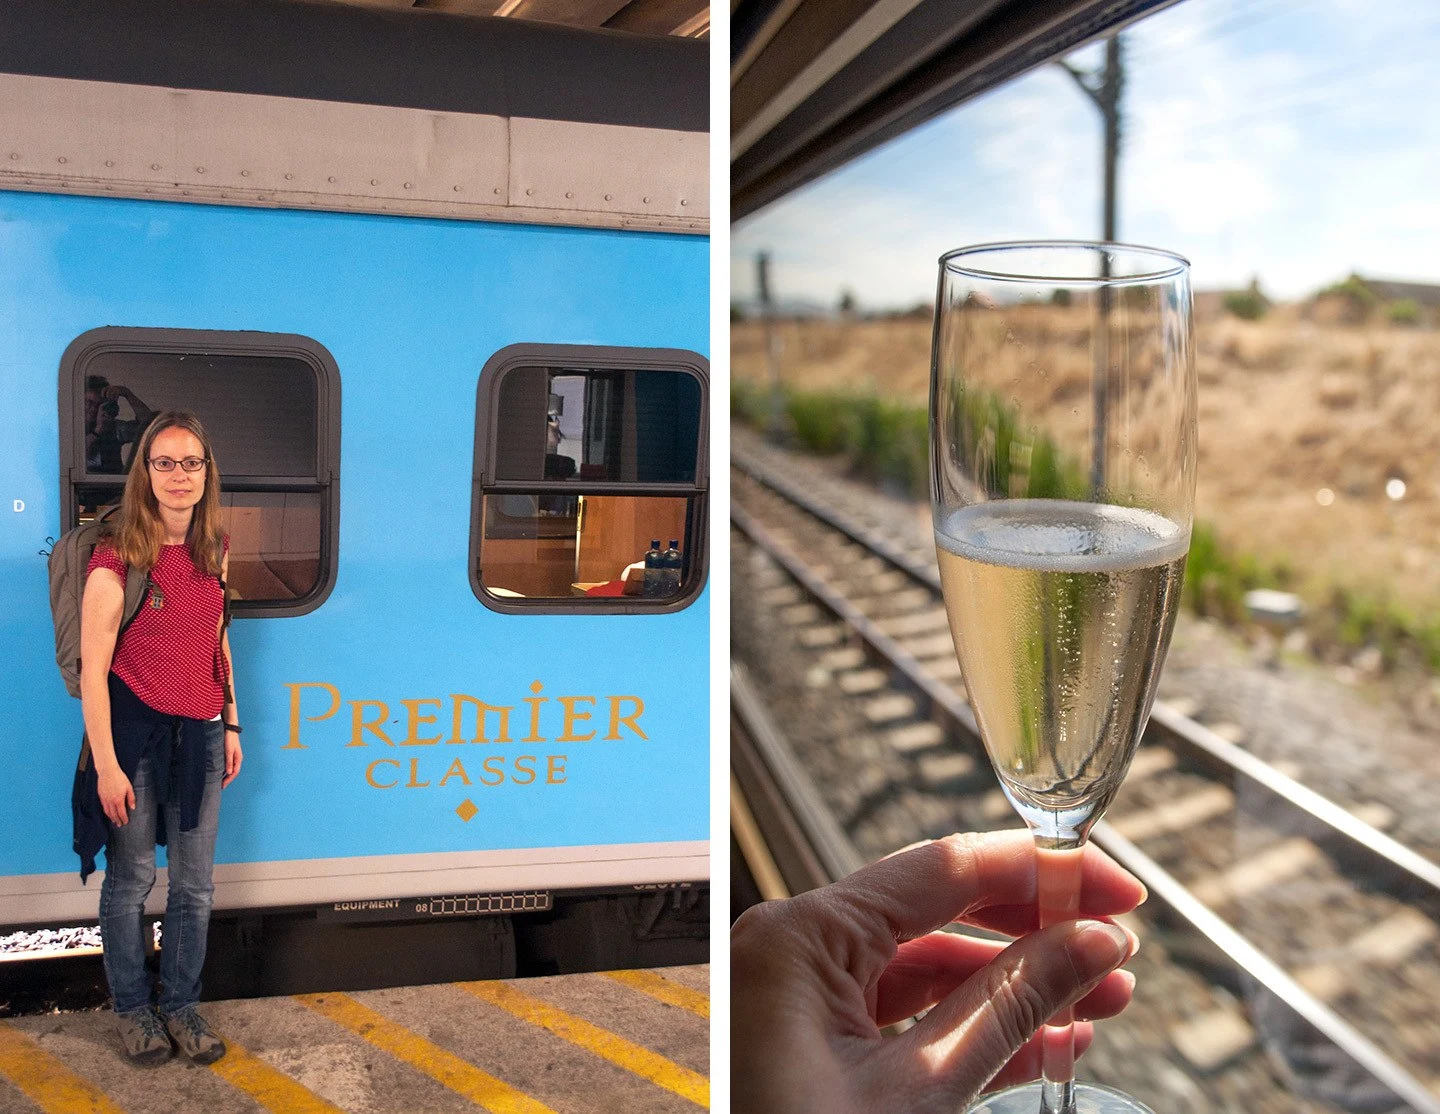 South Africa's Premier Classe train carriage and a bubbly send off